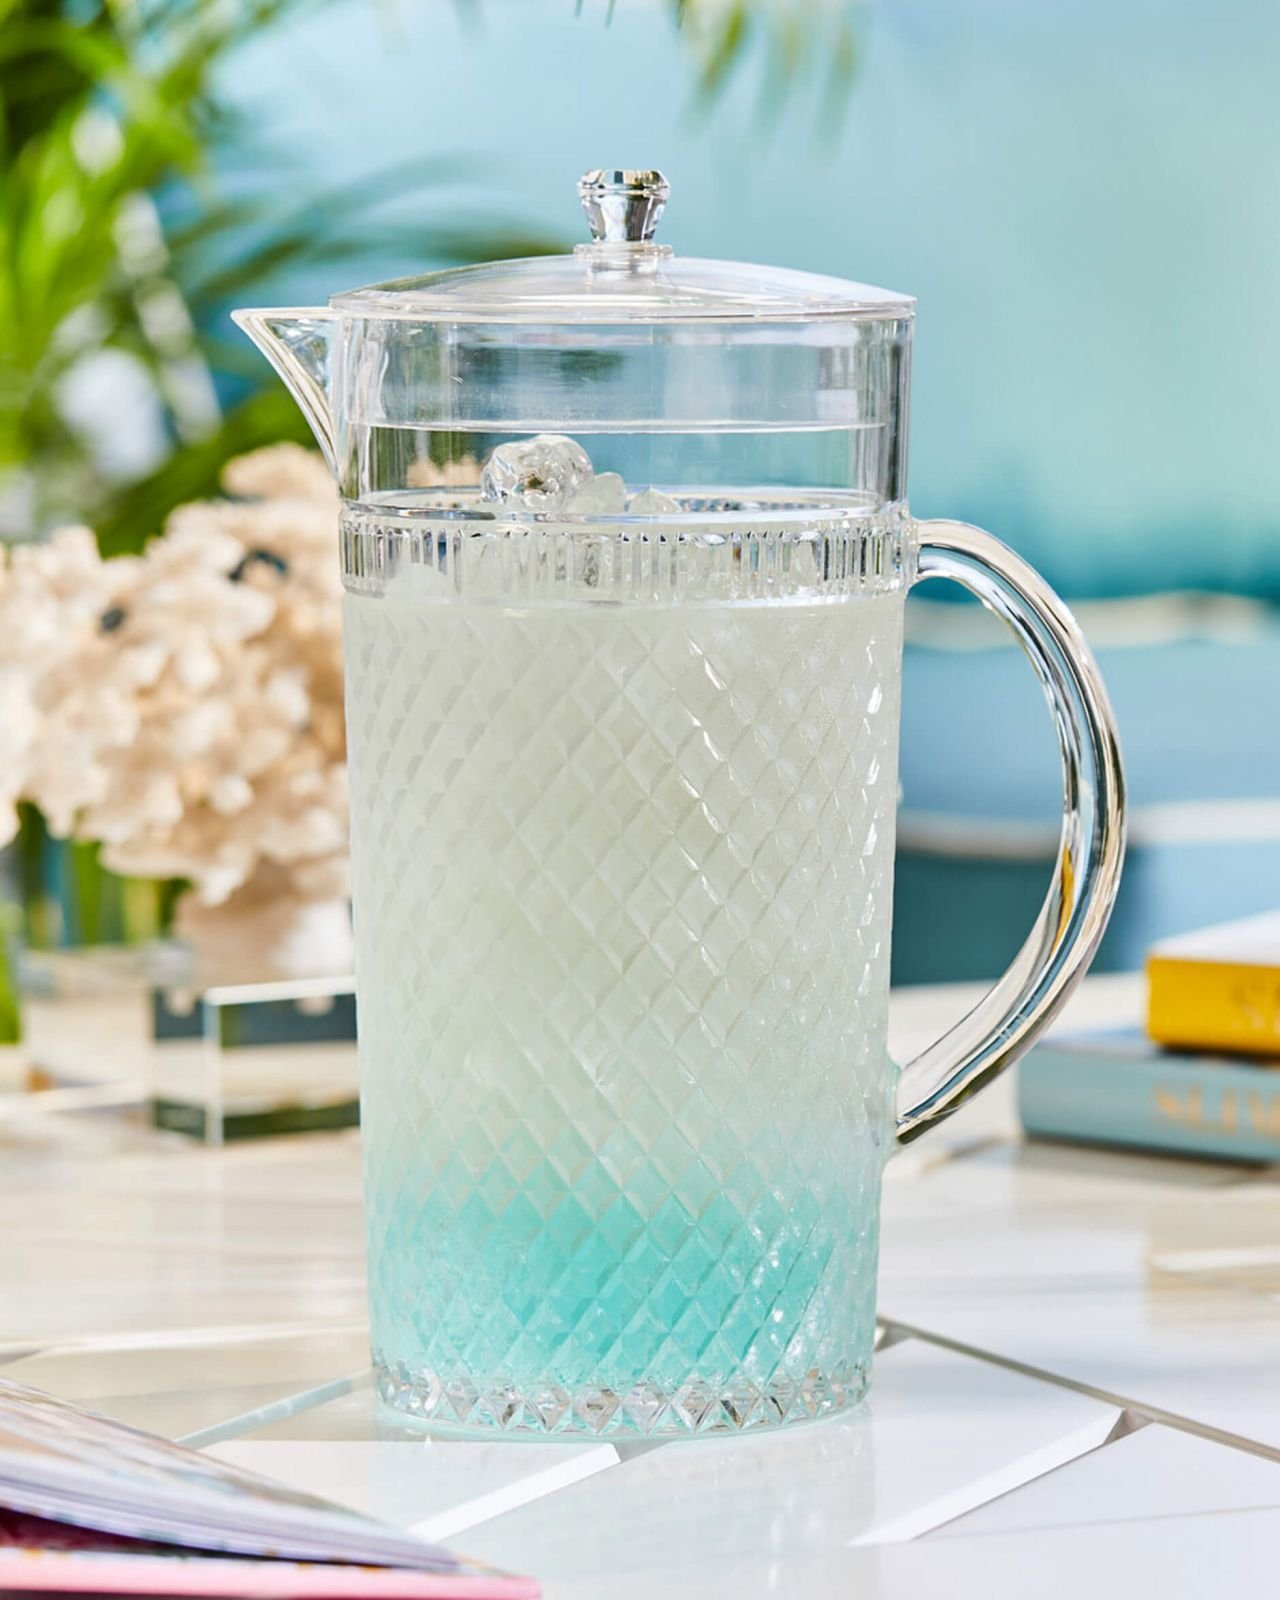 Green Acrylic Pitcher With Lid 